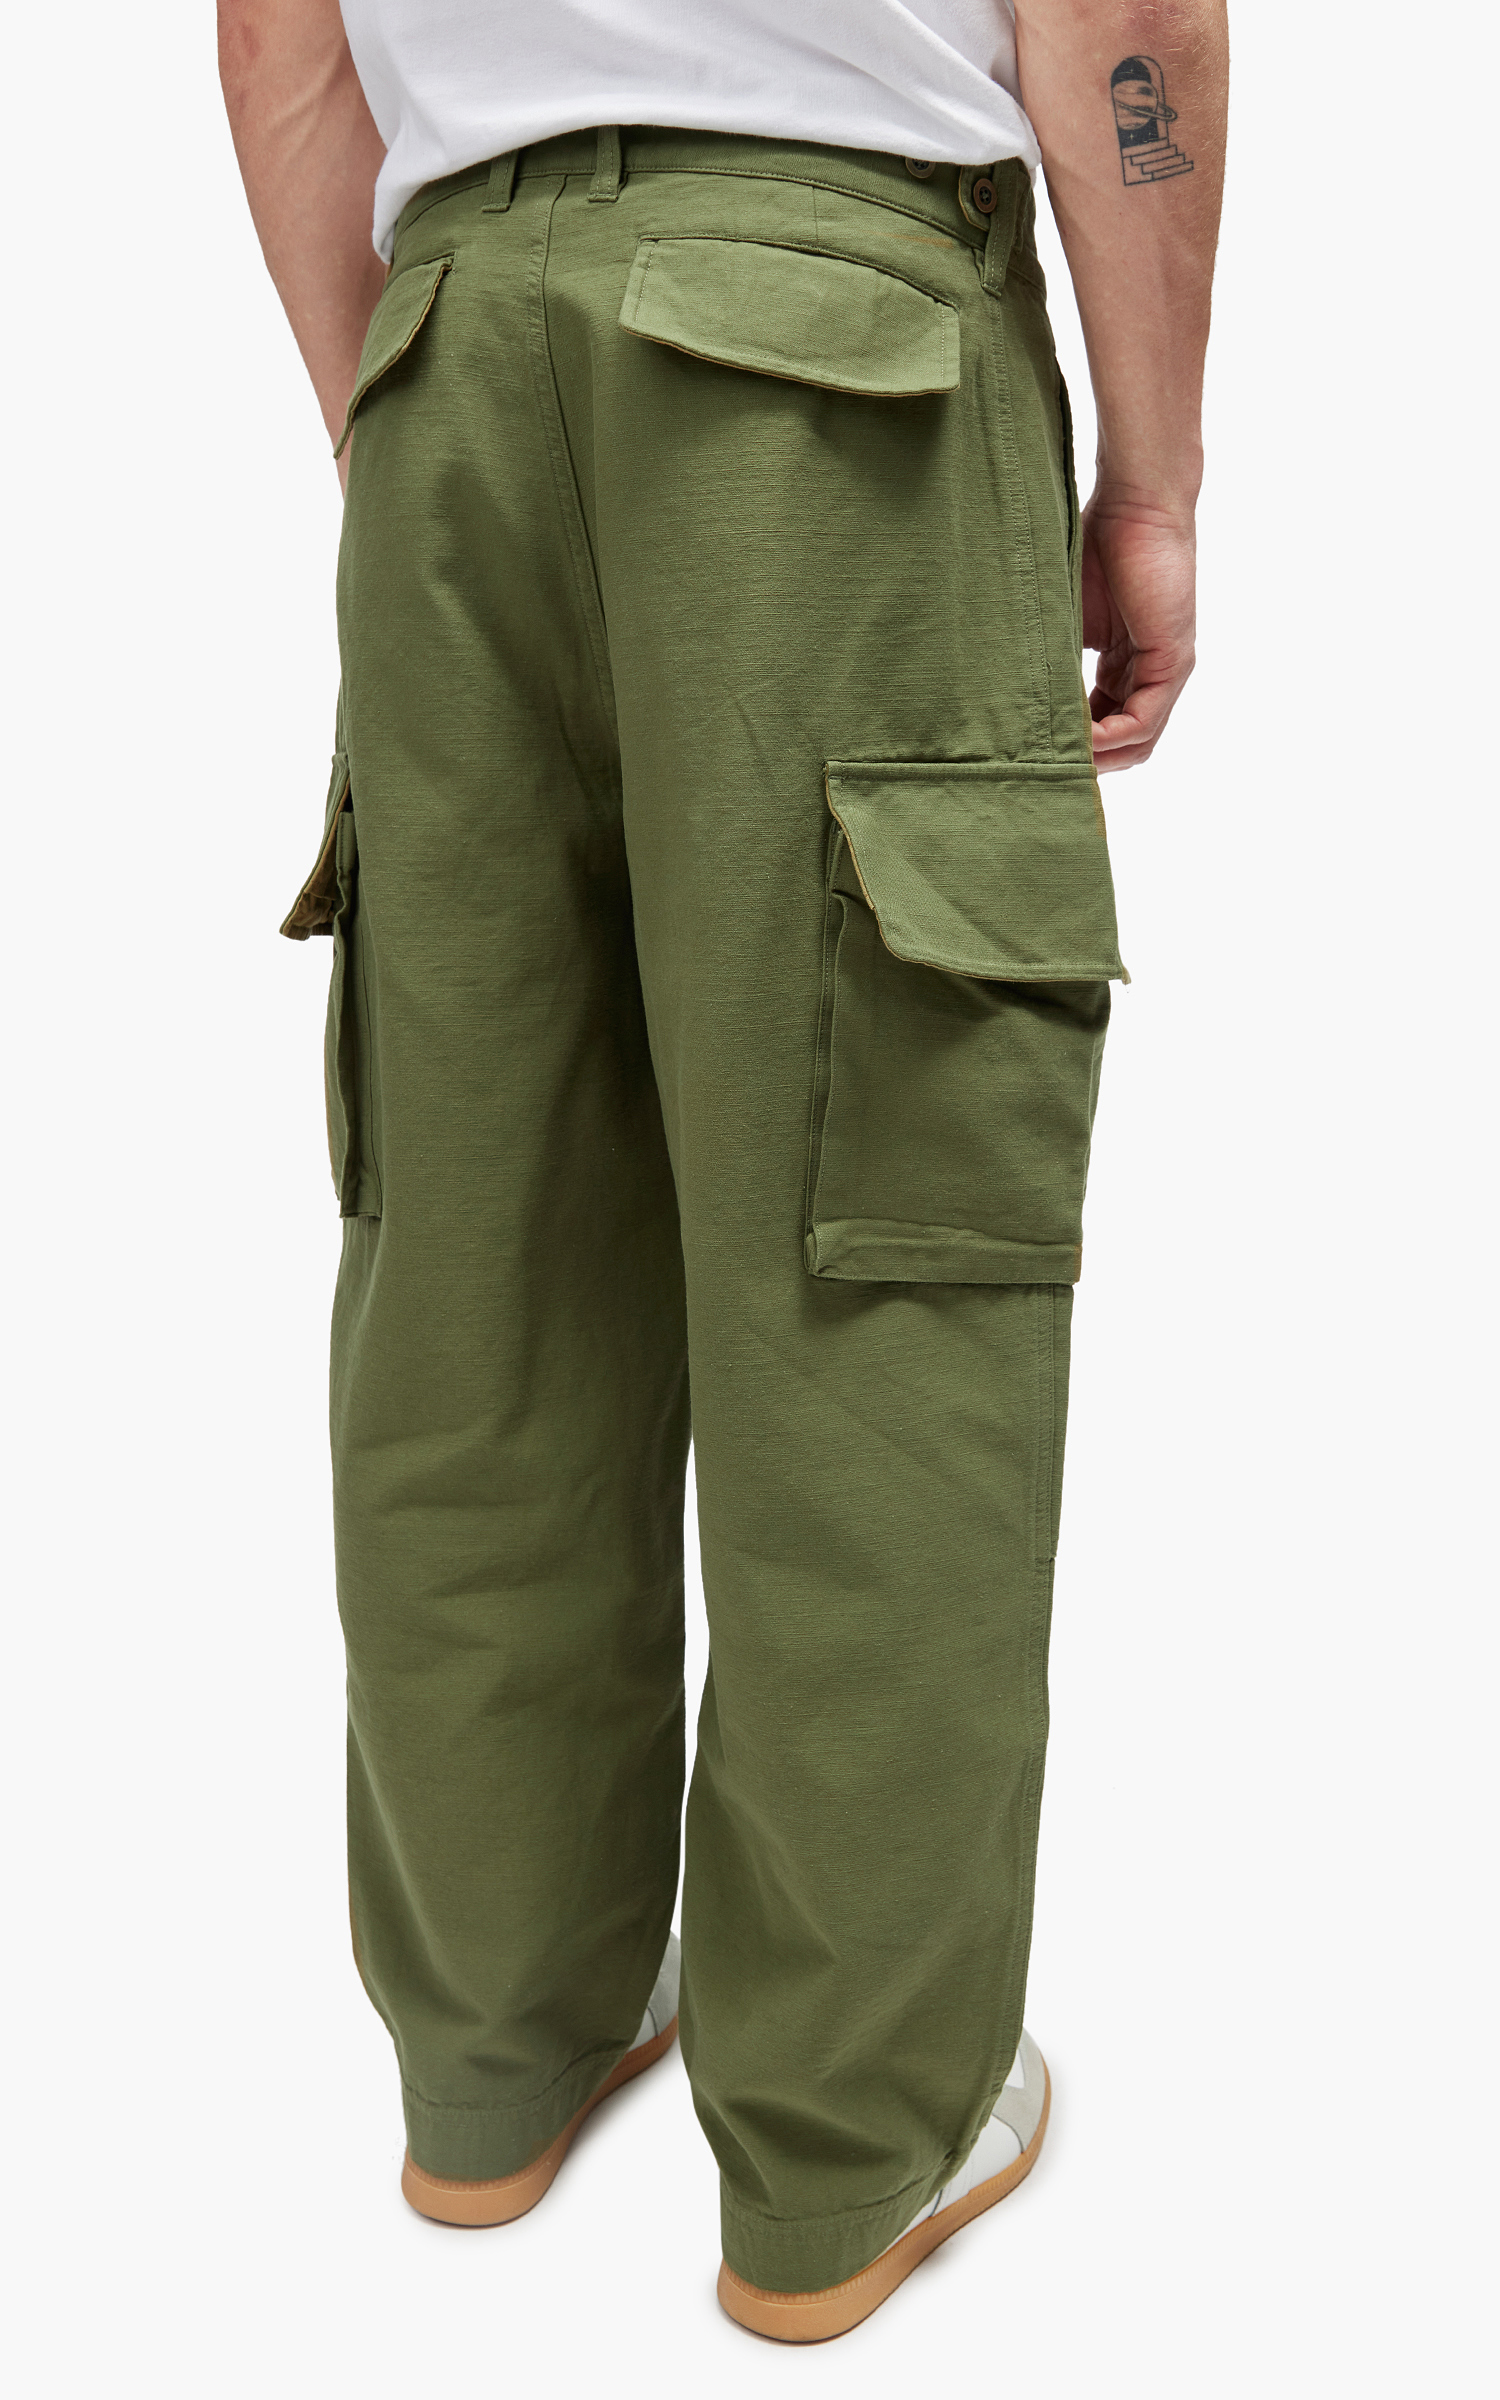 FrizmWORKS M47 French Army Pants Olive | Cultizm